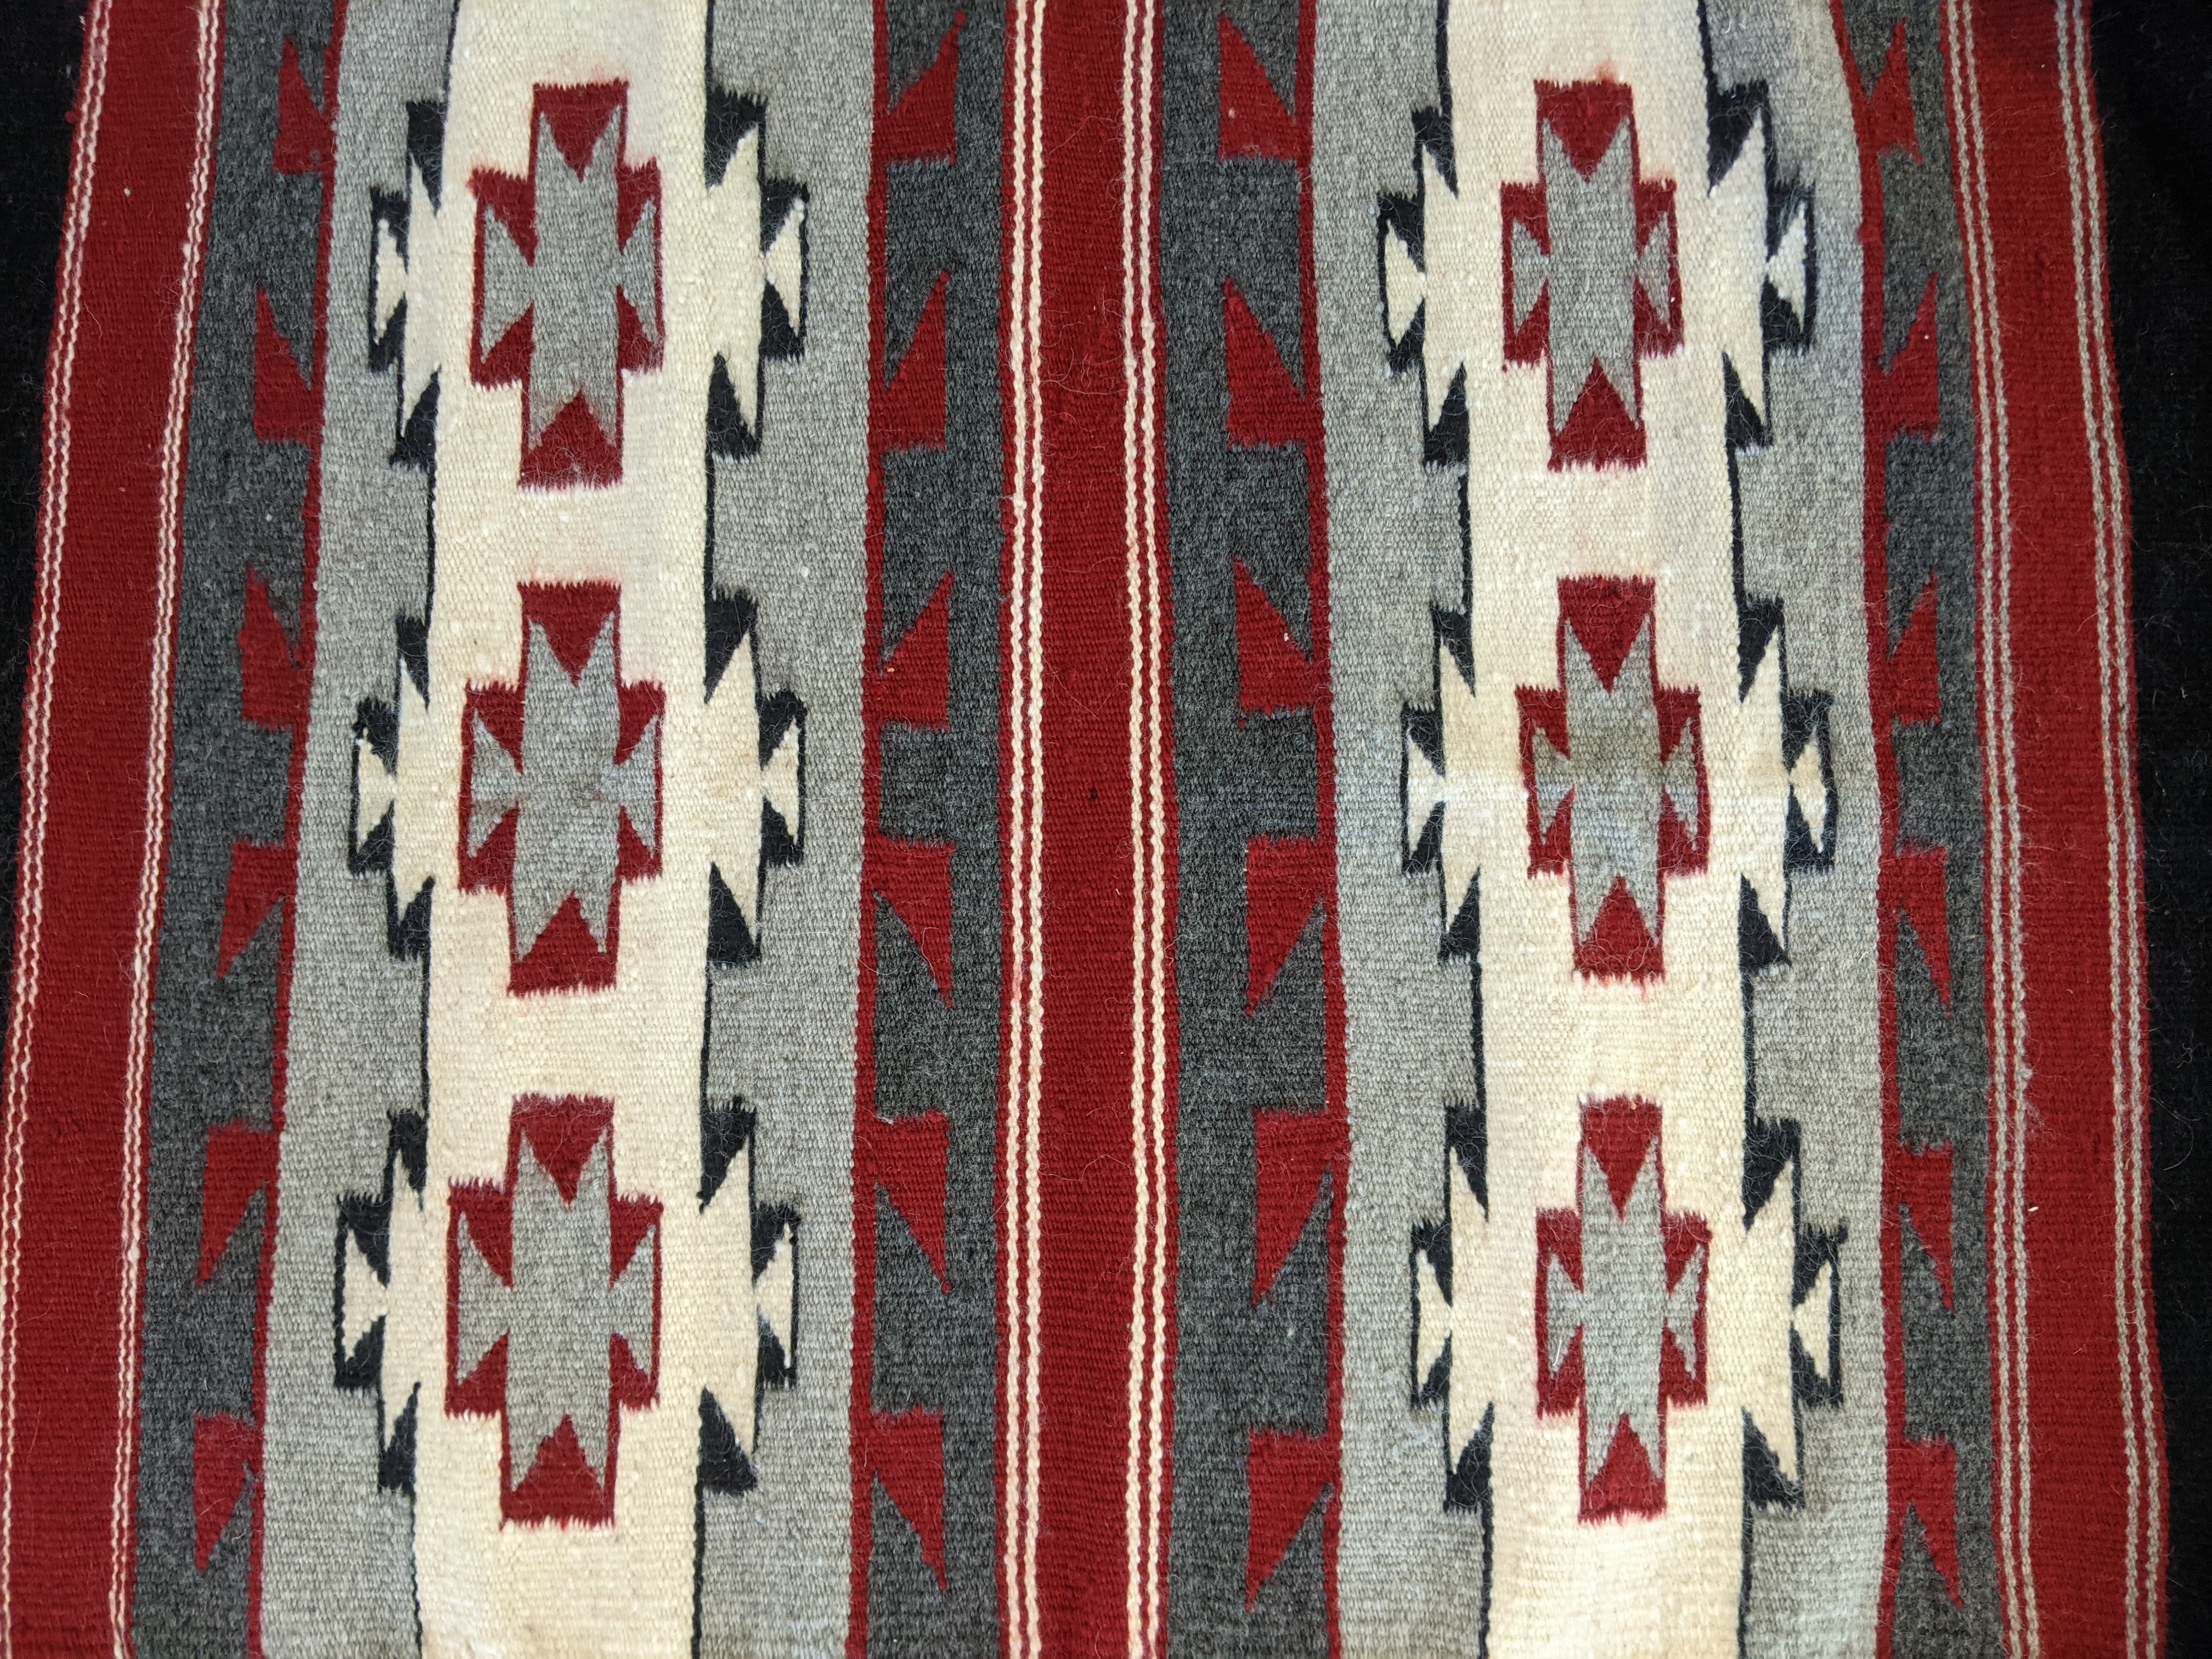 Red, grey, and black striped rug with geometric patterns in vertical bands. By Isabelle Deschine